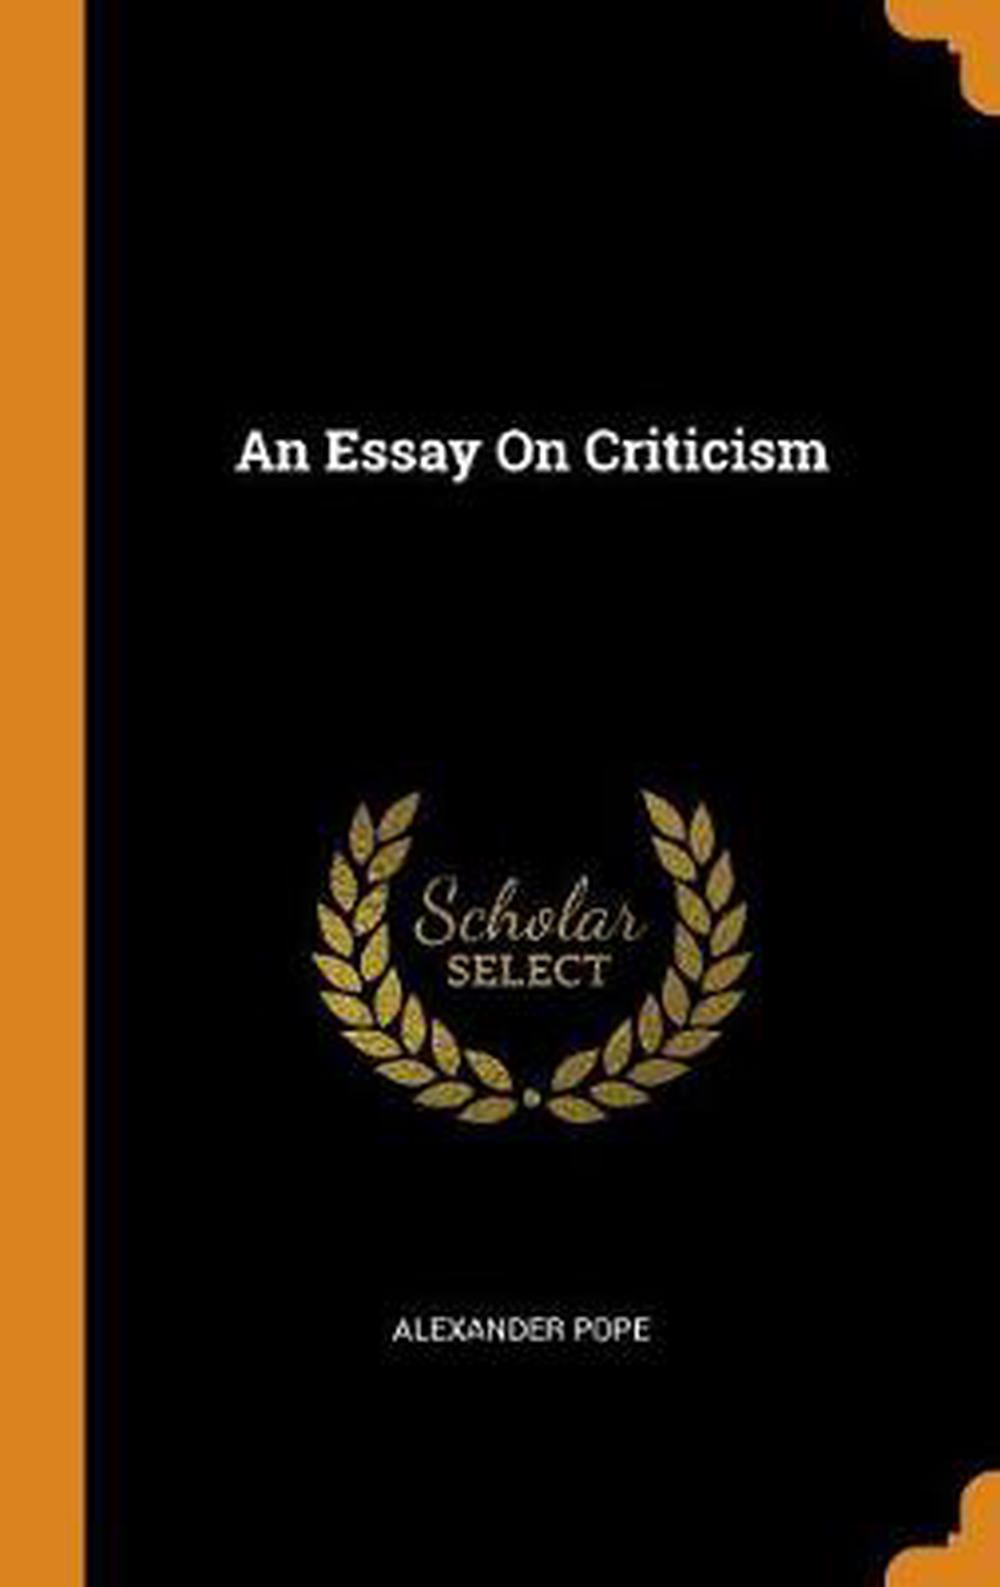 essay on criticism full text